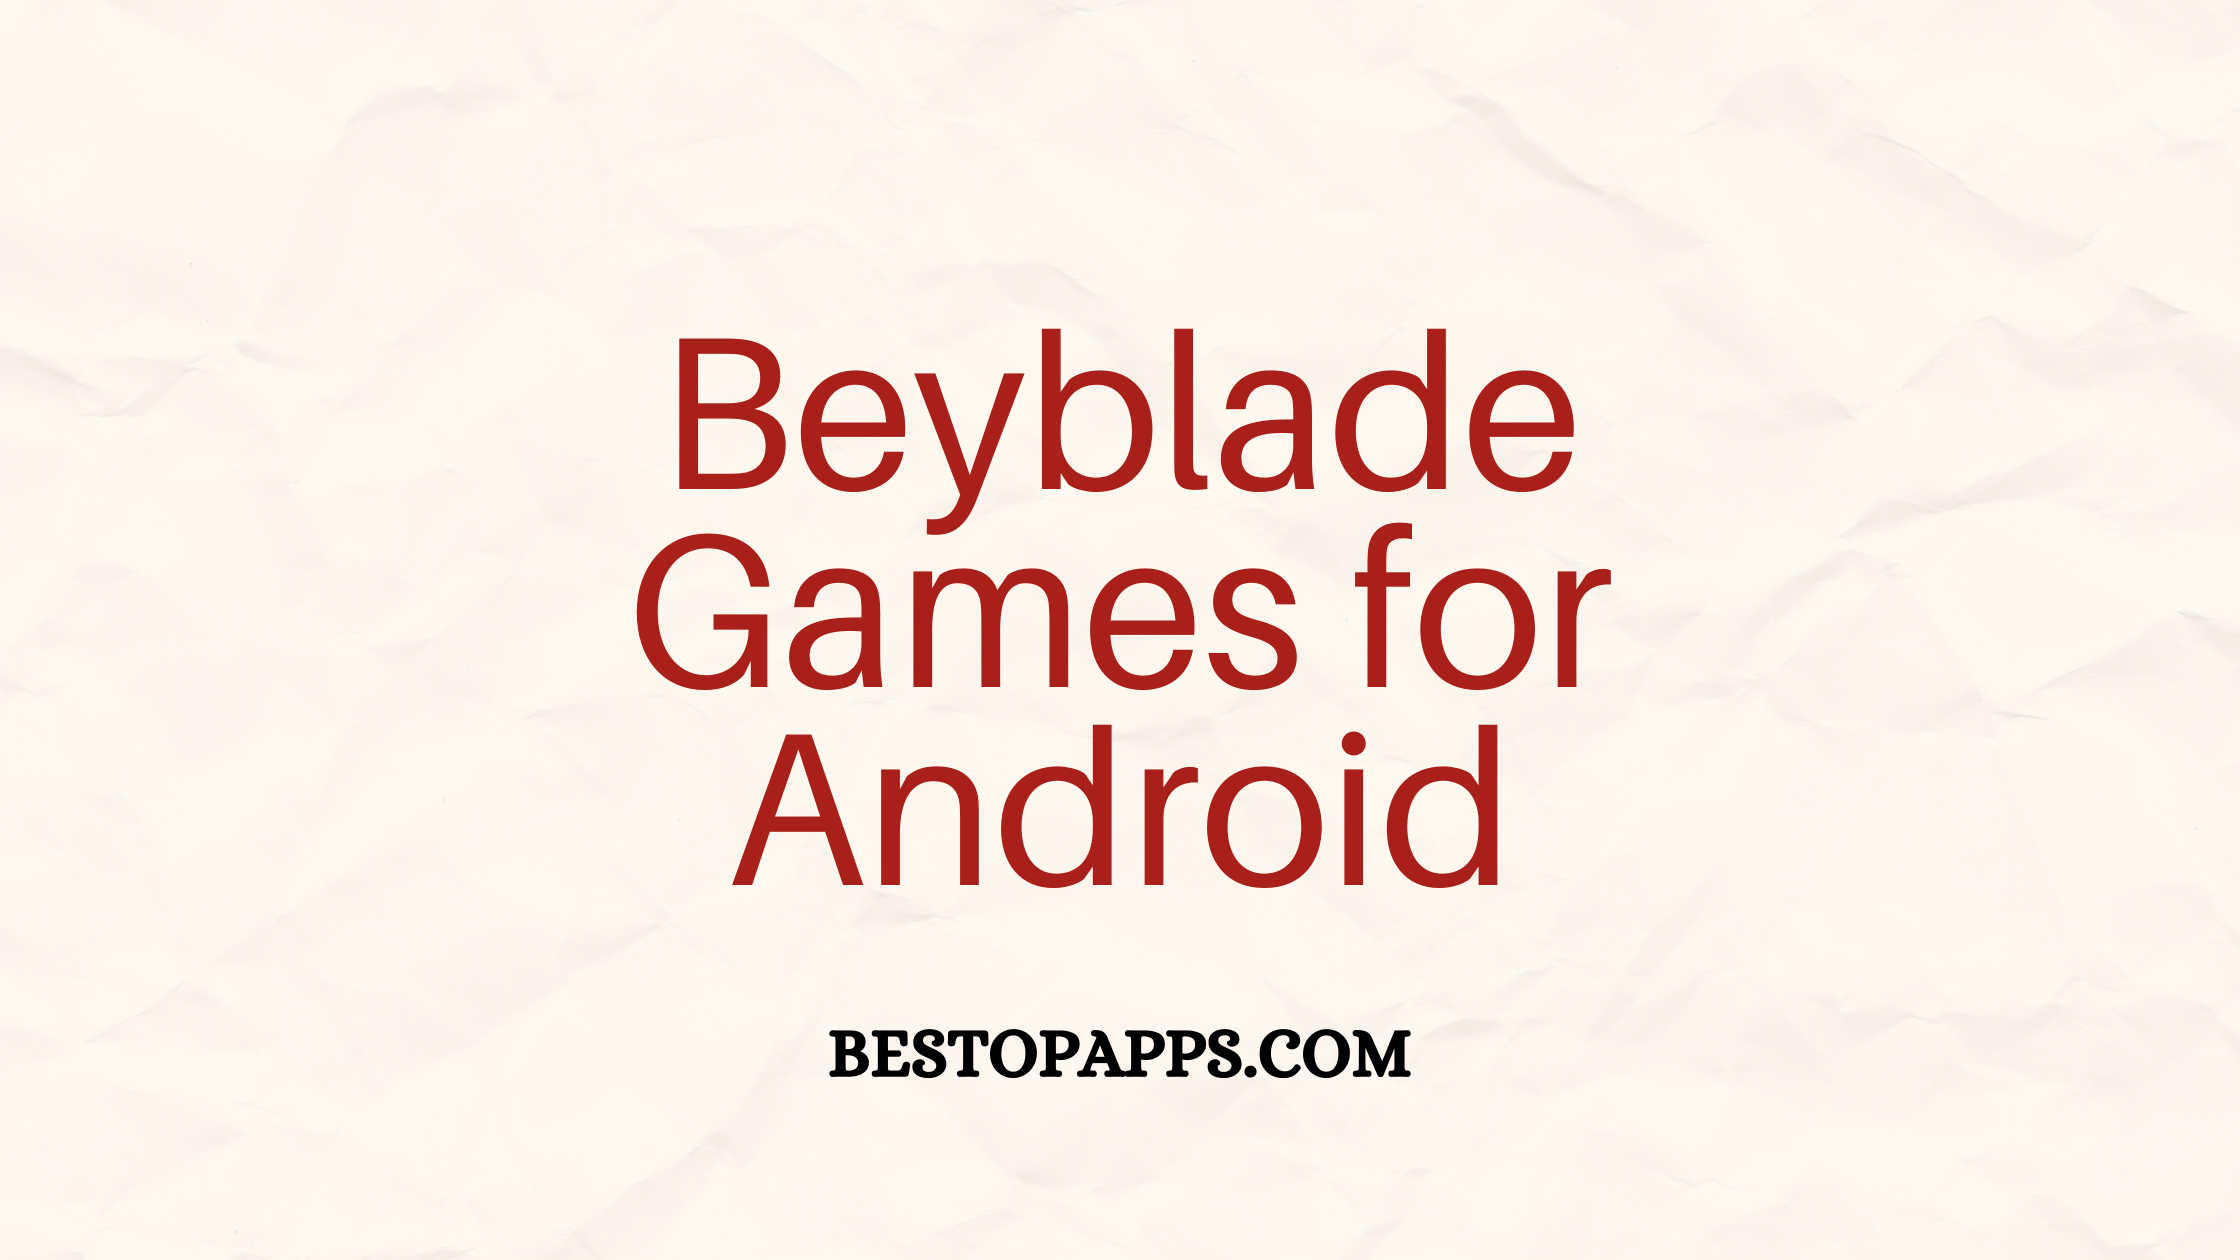 Beyblade Games for Android